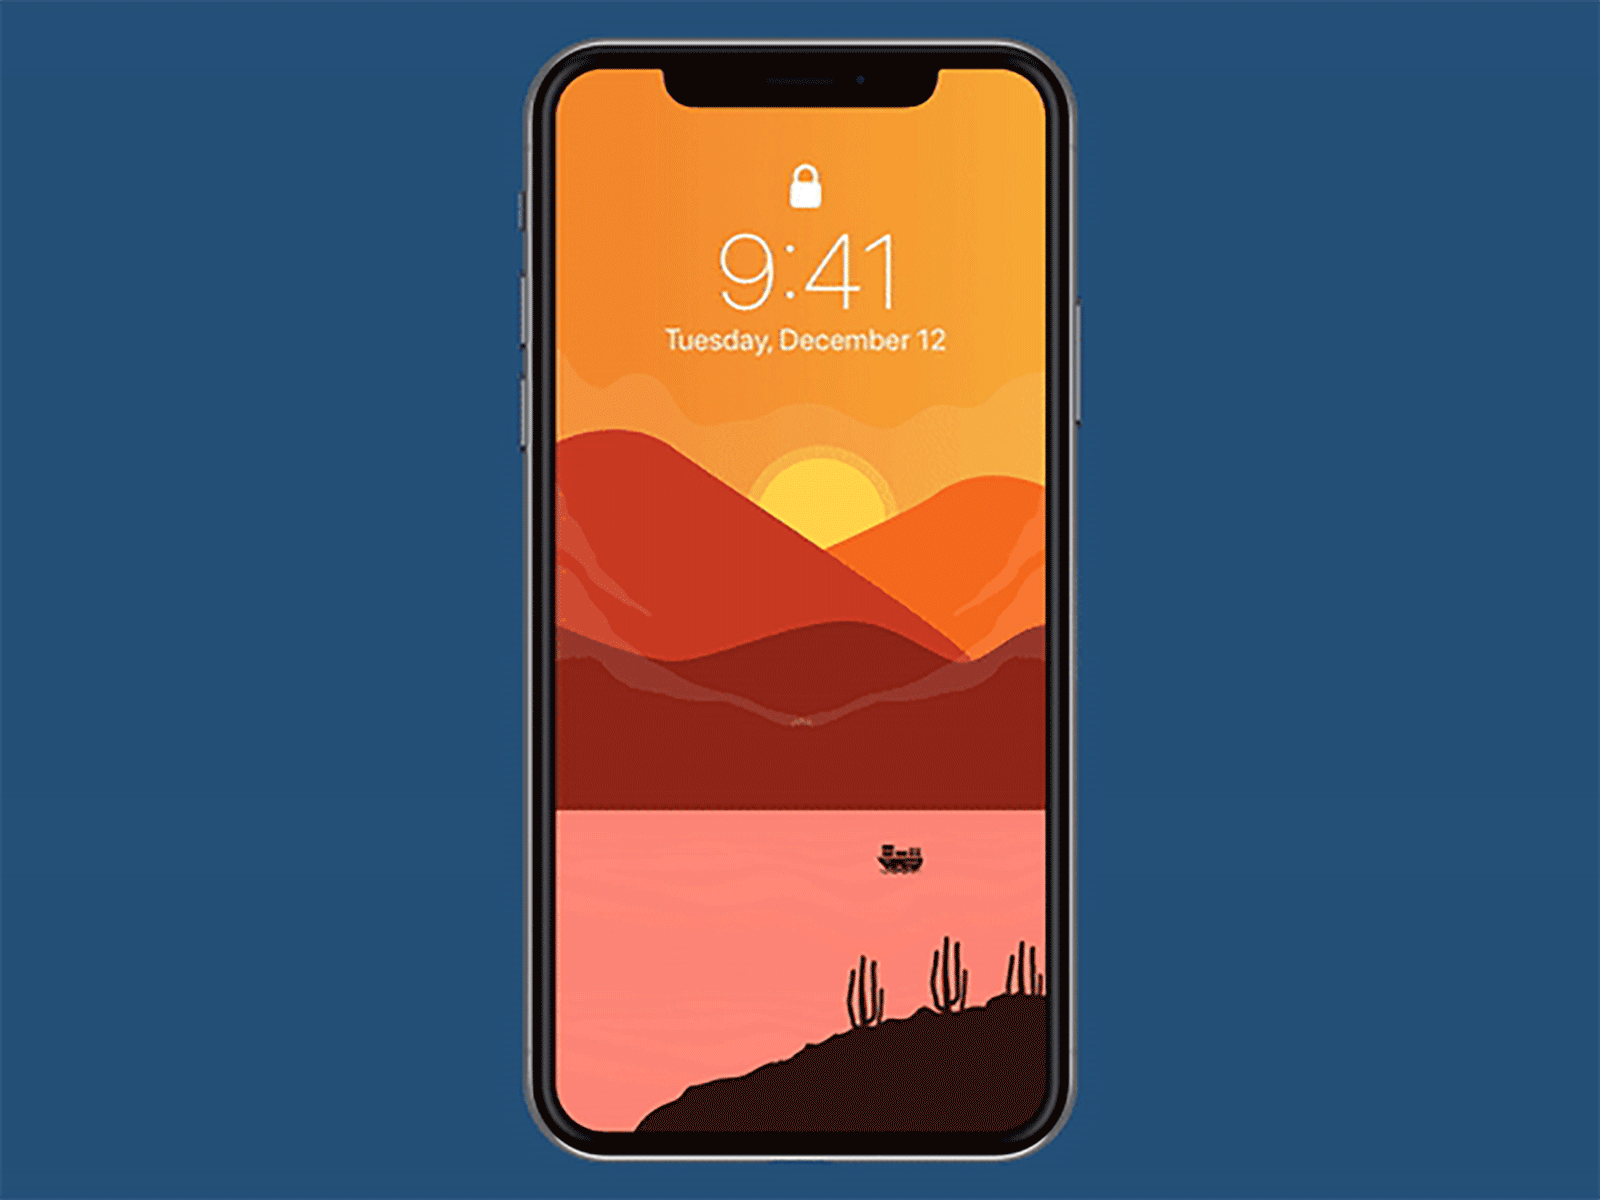 Wallpaper ios and android - Freebies android background free freebies illustration ios iphone landscape product design ui ux vector wallpaper